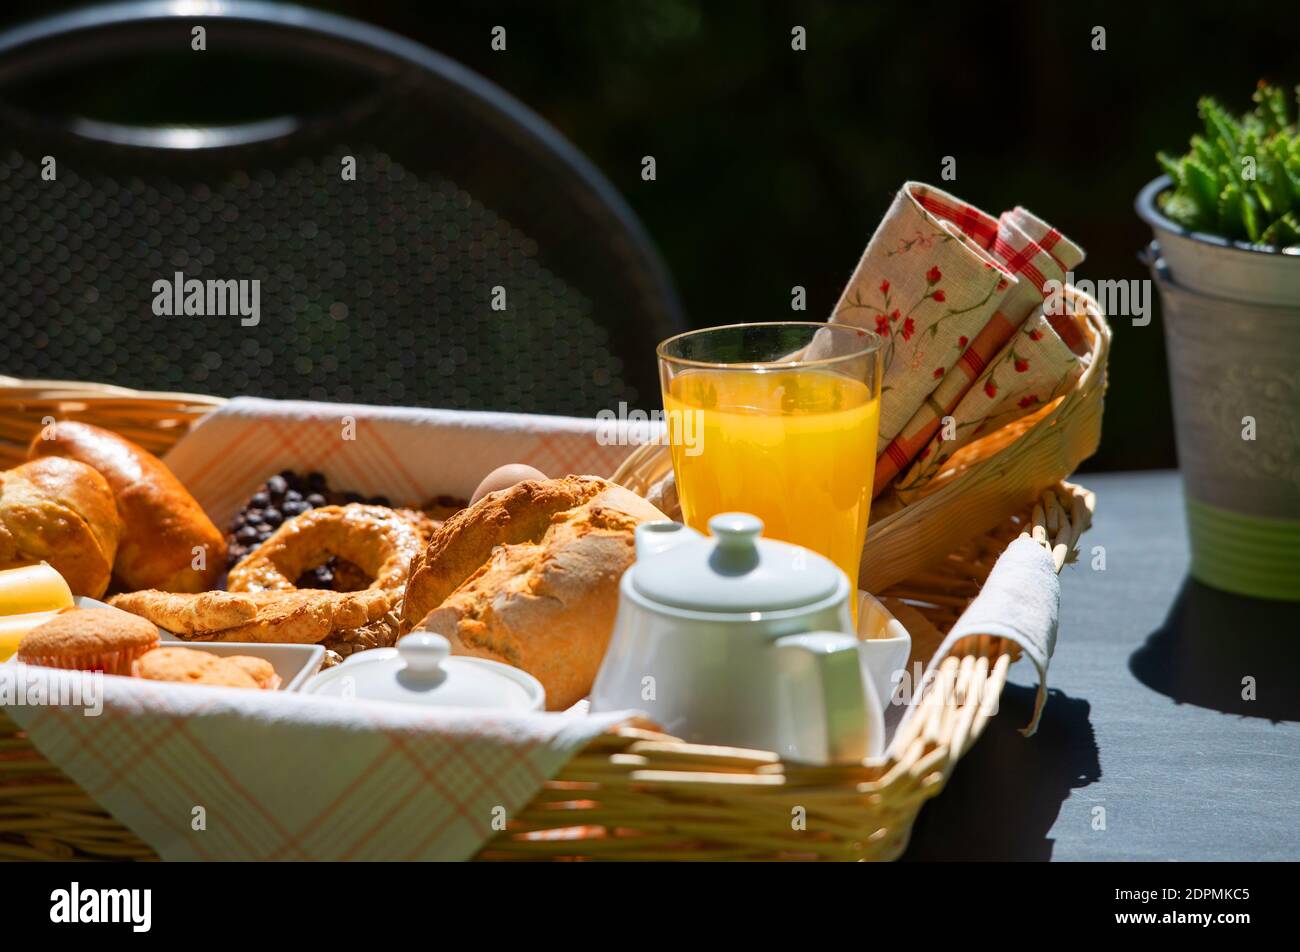 Close Up of continental breakfast with orange juice, tea and fresh croissants on table top surface in summer garden background Stock Photo